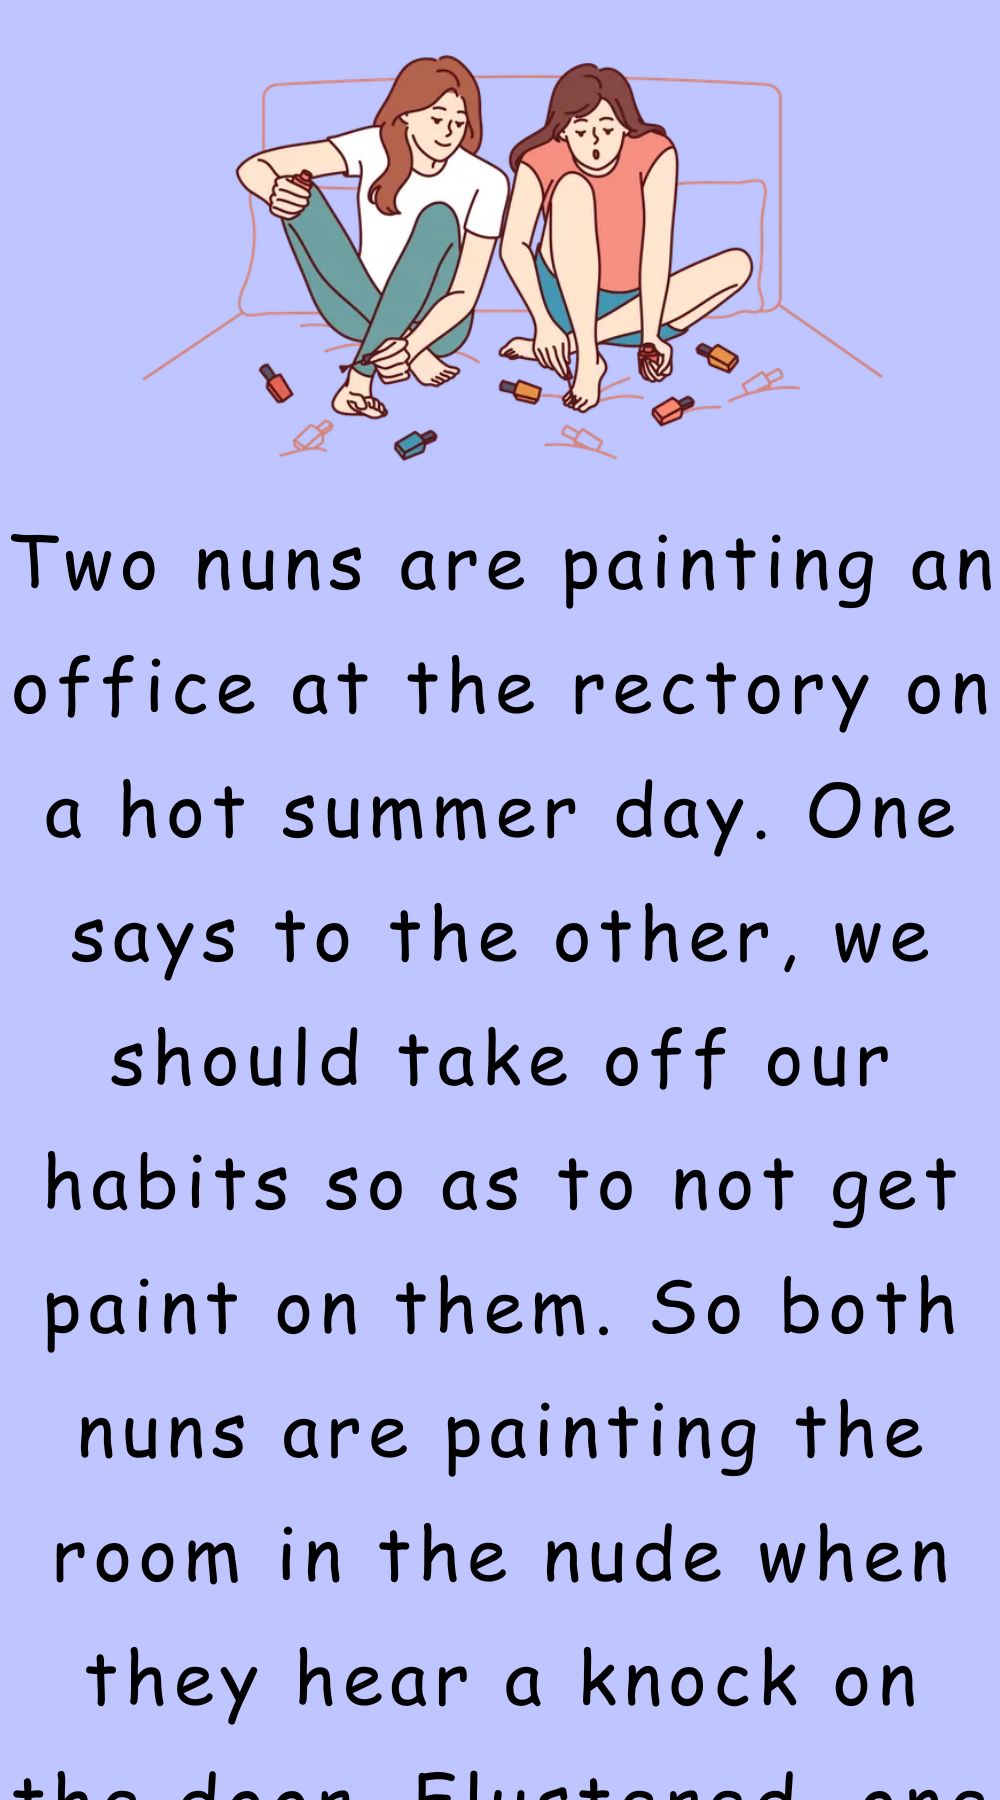 Two nuns are painting an office at the rectory